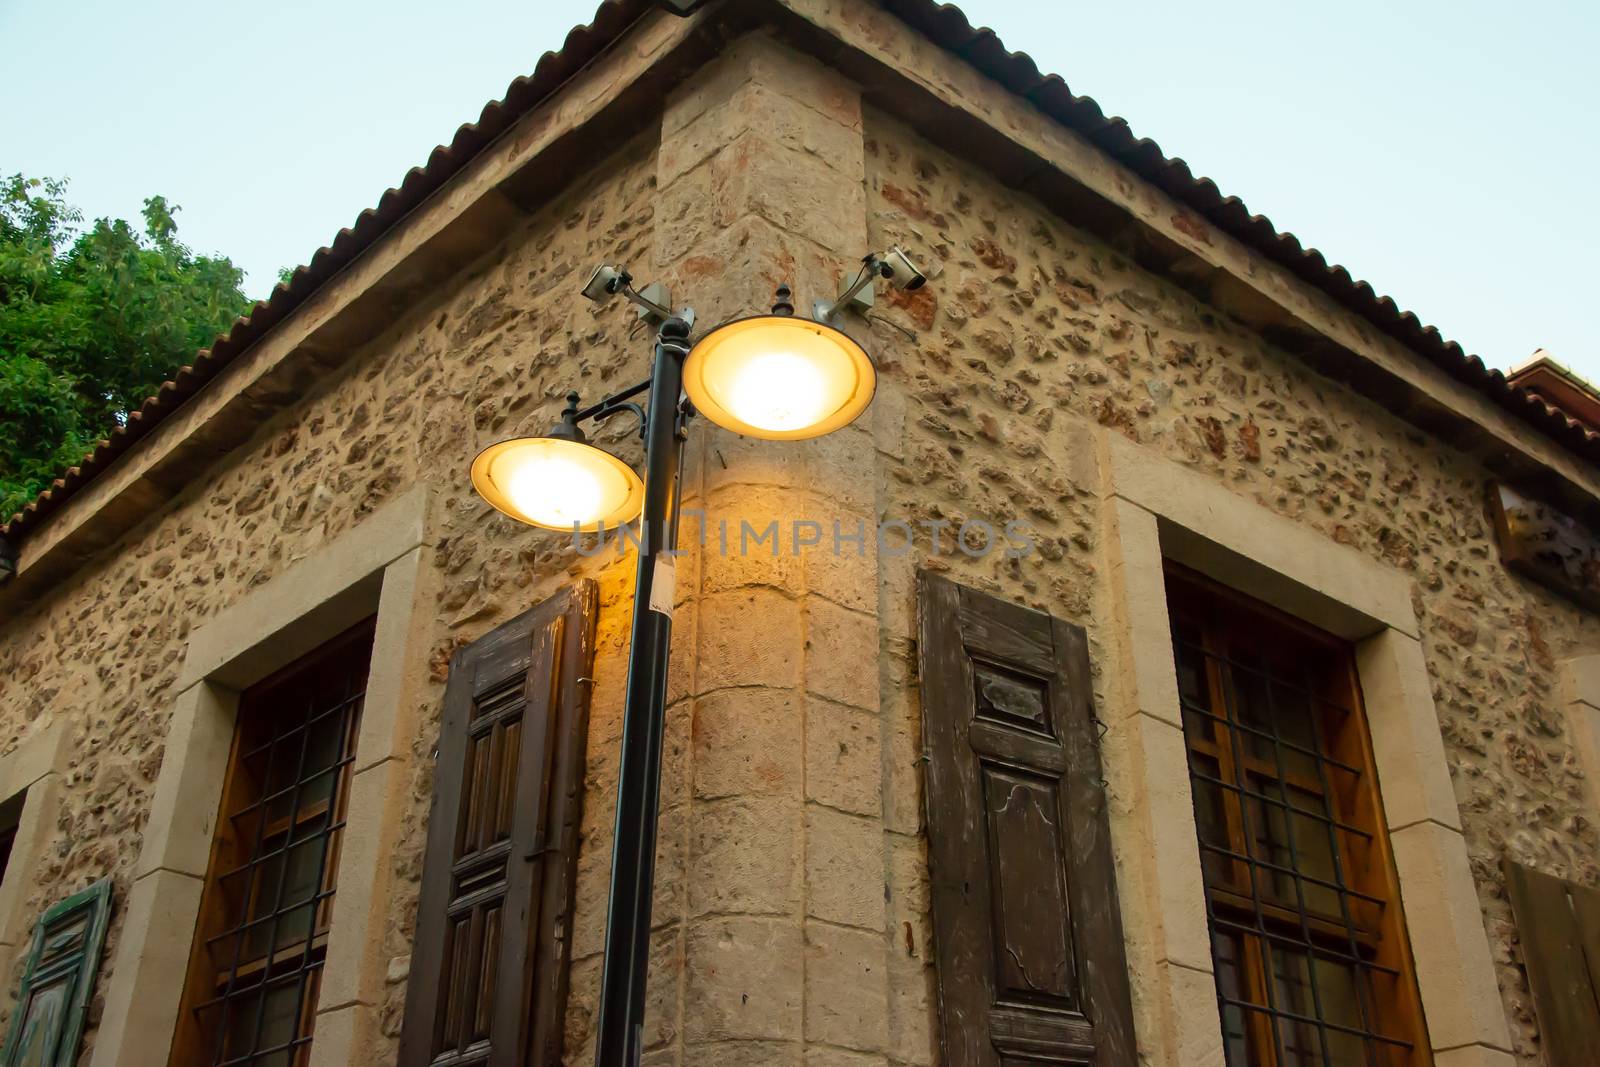 A street light and an old Ottoman time stone house on the streets of Antalya Old Town Kaleici. Stock image.